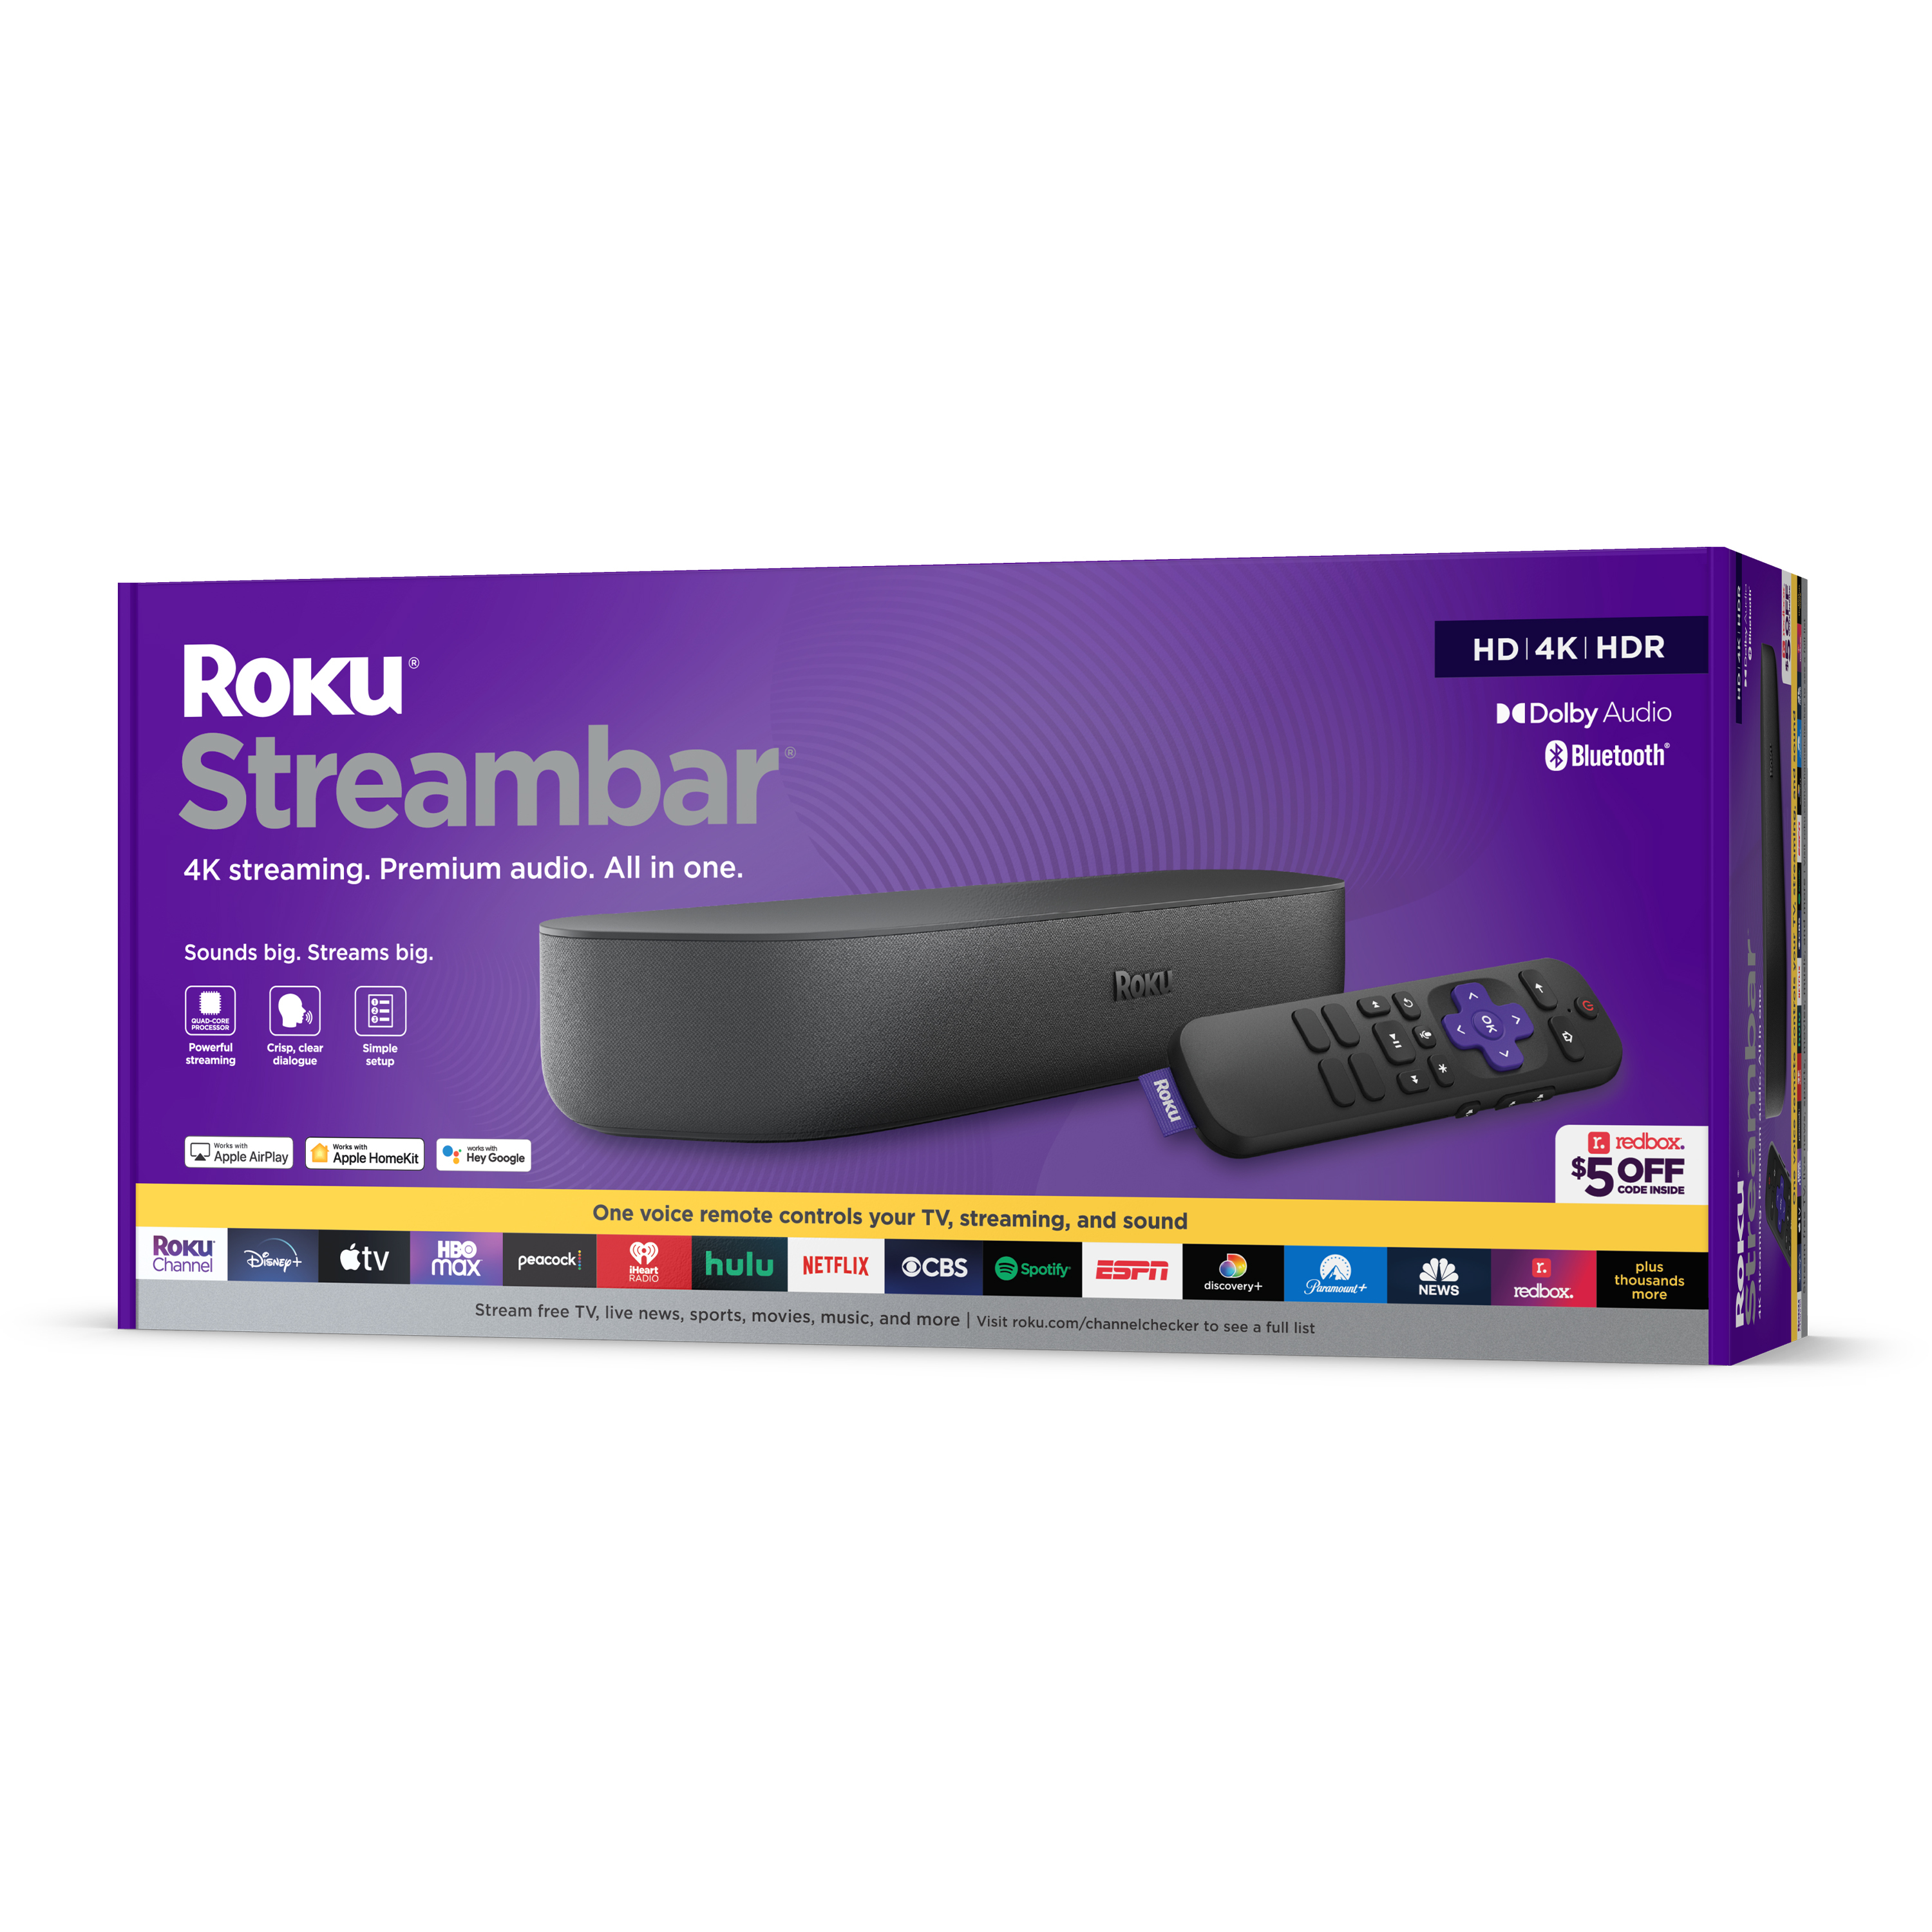 Roku Streambar | 4K/HD/HDR Streaming Media Player & Premium Audio, All In One, Includes Roku Voice Remote - image 1 of 14